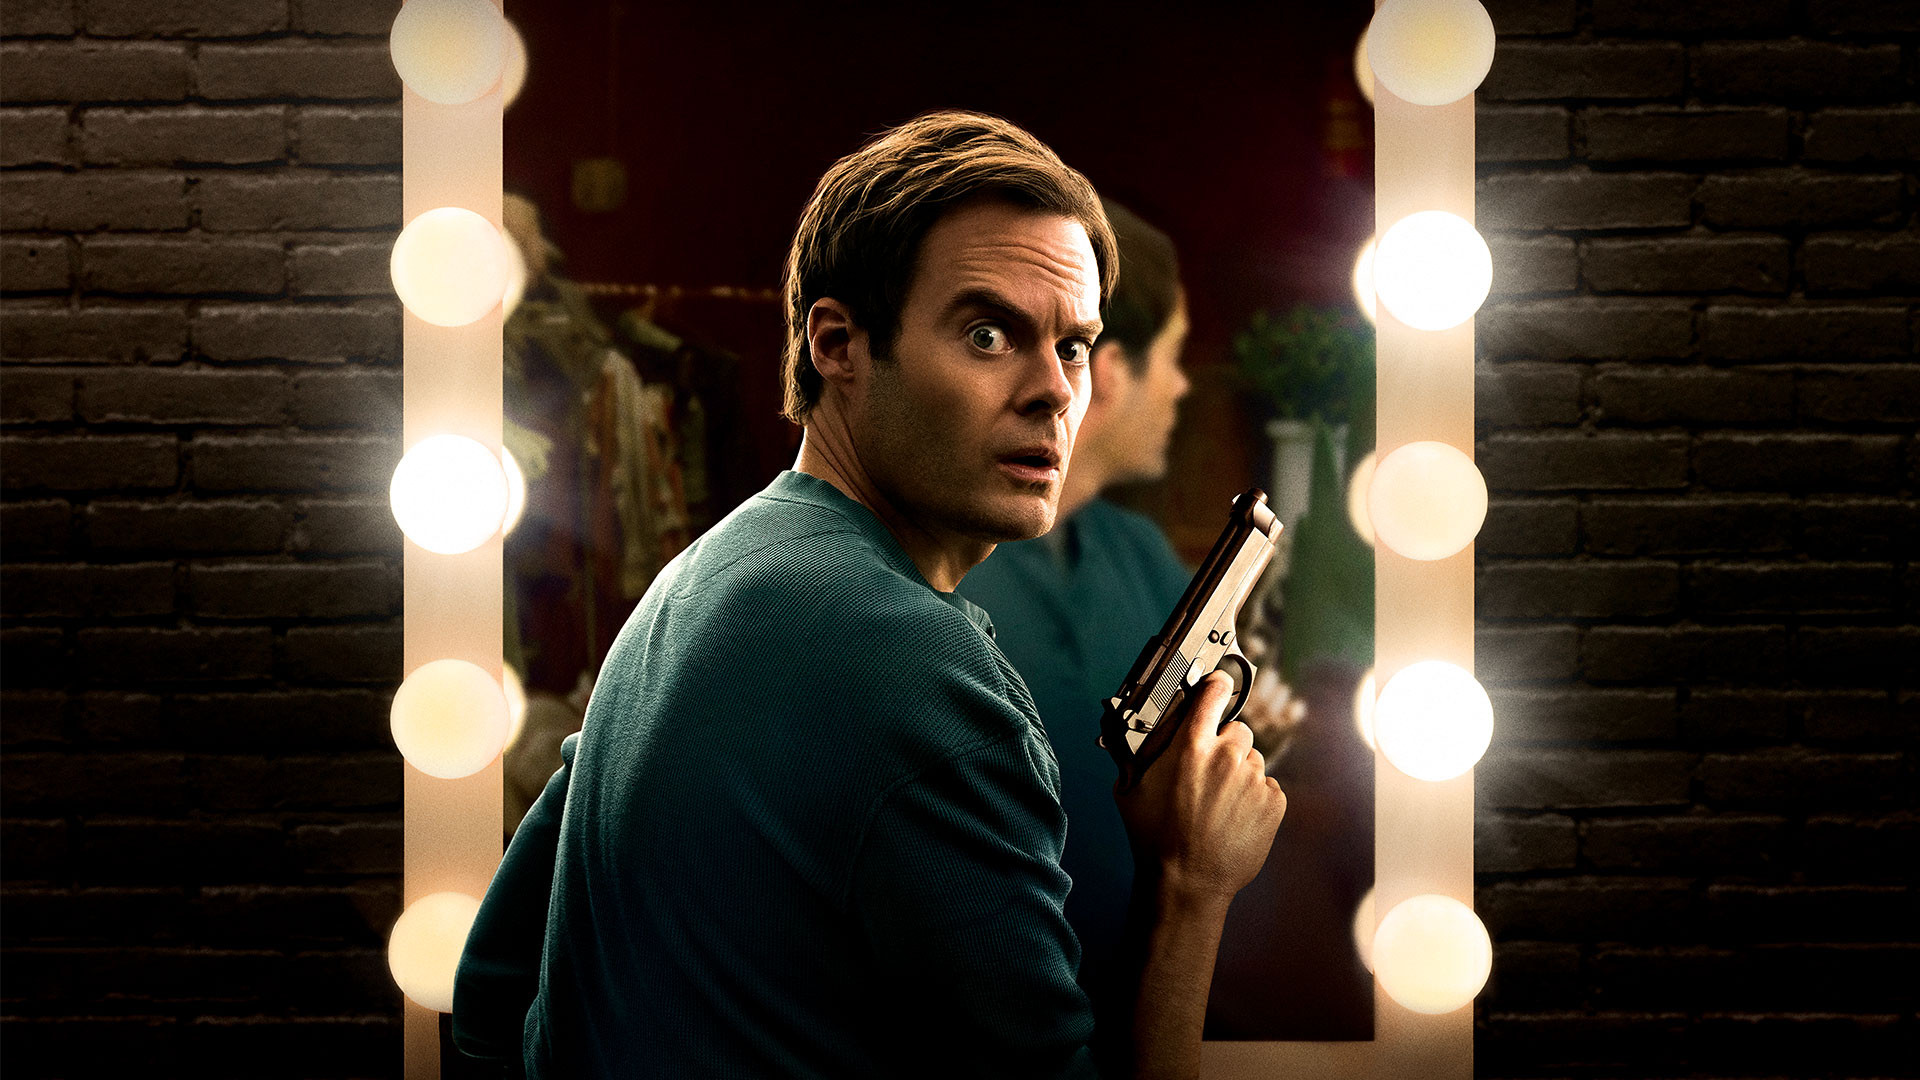 Nuanced brilliance: Bill Hader shines as 'Barry'